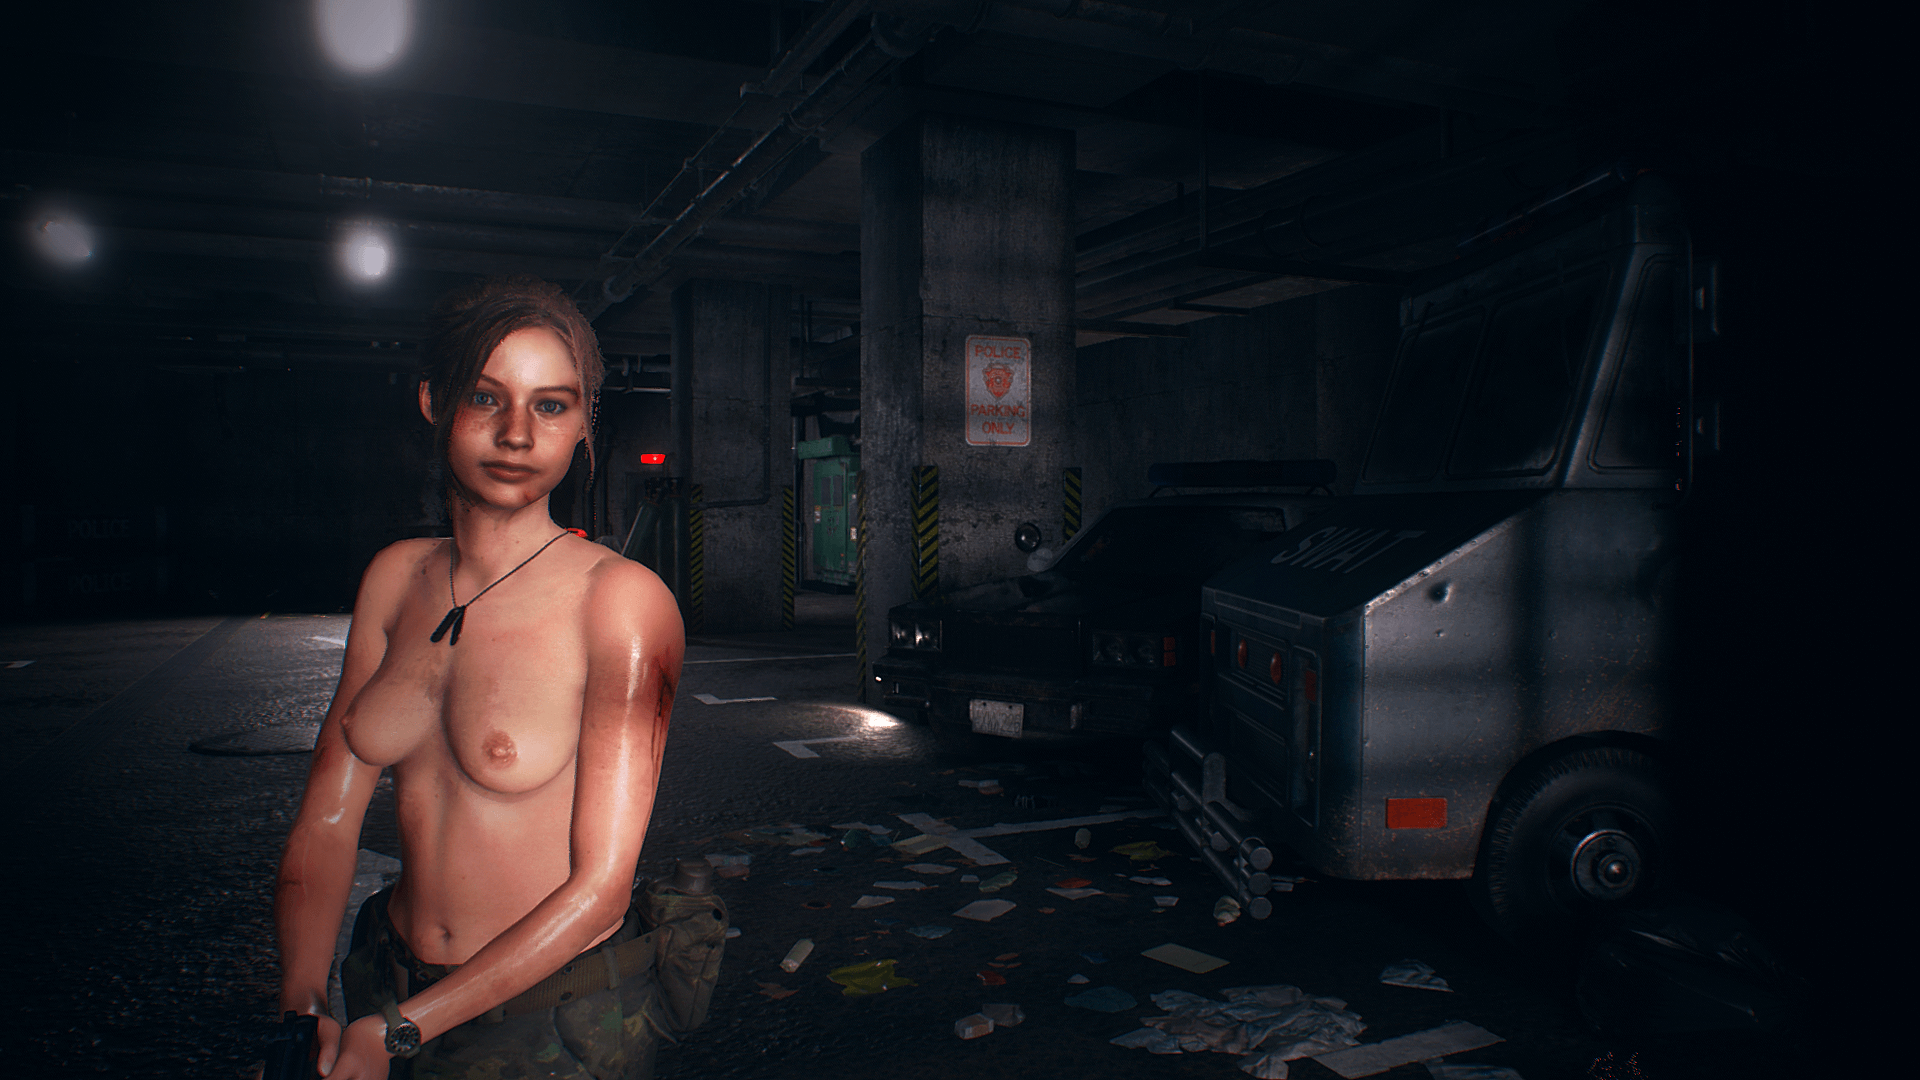 brian rissmiller recommends Resident Evil Hd Nude Mod